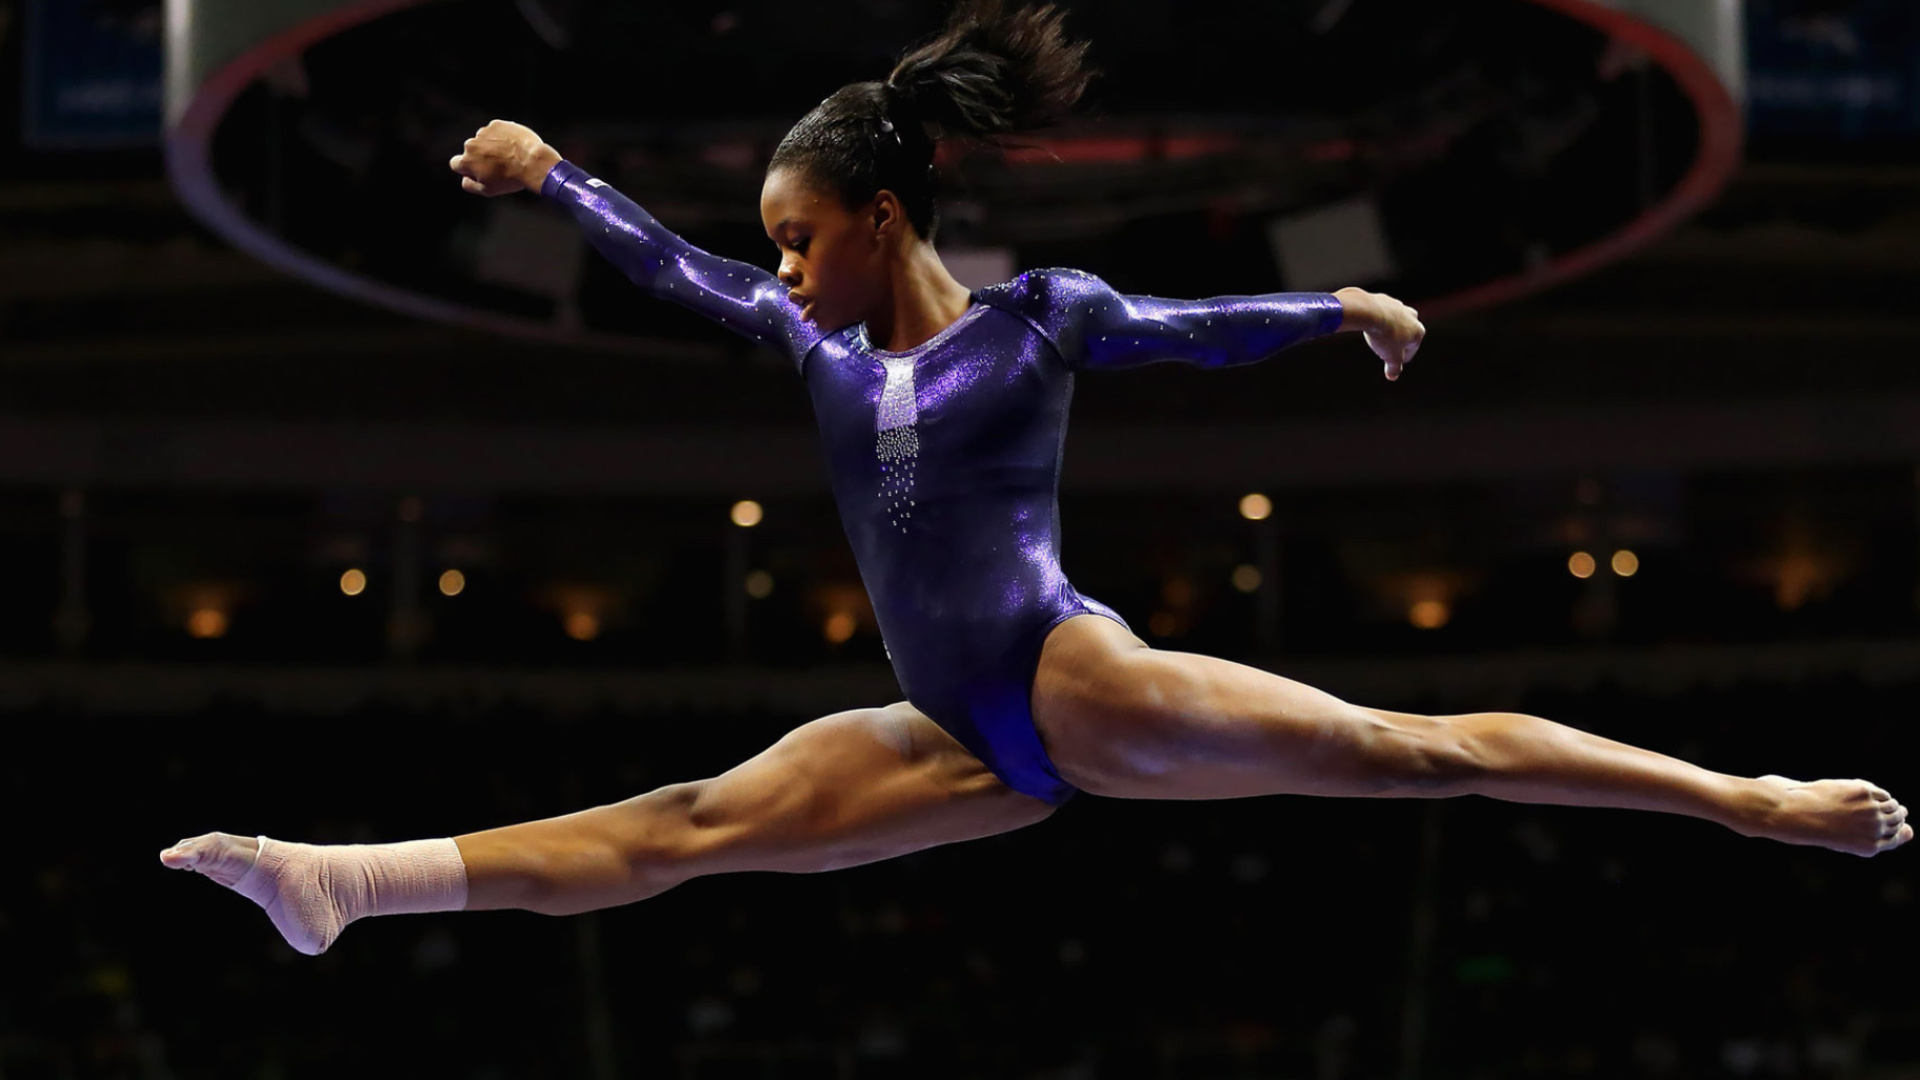 Acrobatic Gymnastics: Gabby Douglas, The first African American to become the Olympic individual all-around champion. 1920x1080 Full HD Wallpaper.